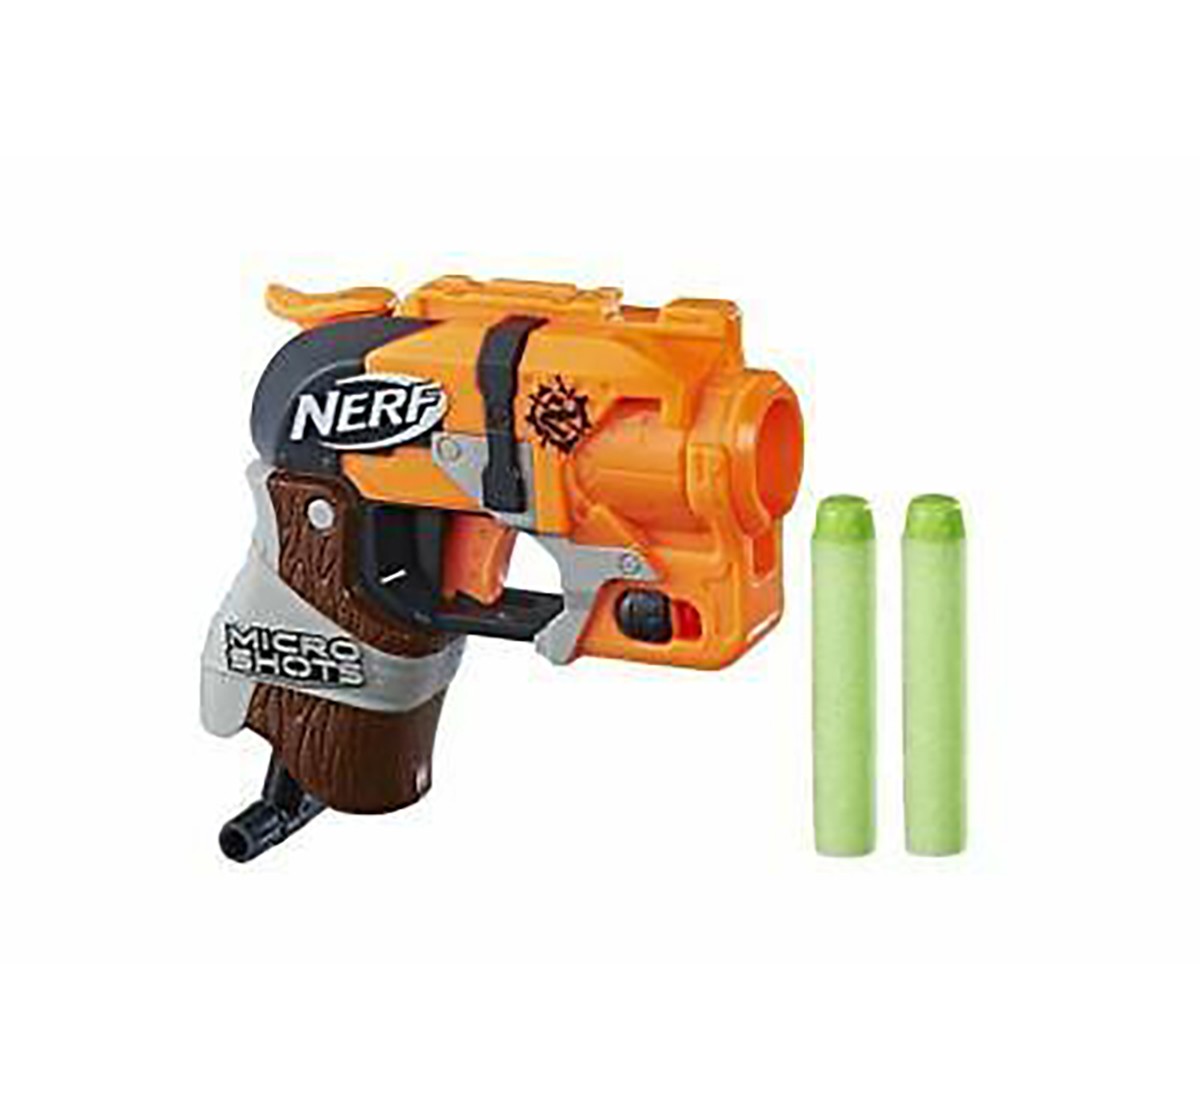 Nerf Microshots Blaster and Combats Assorted Blasters for Kids age 8Y+ 